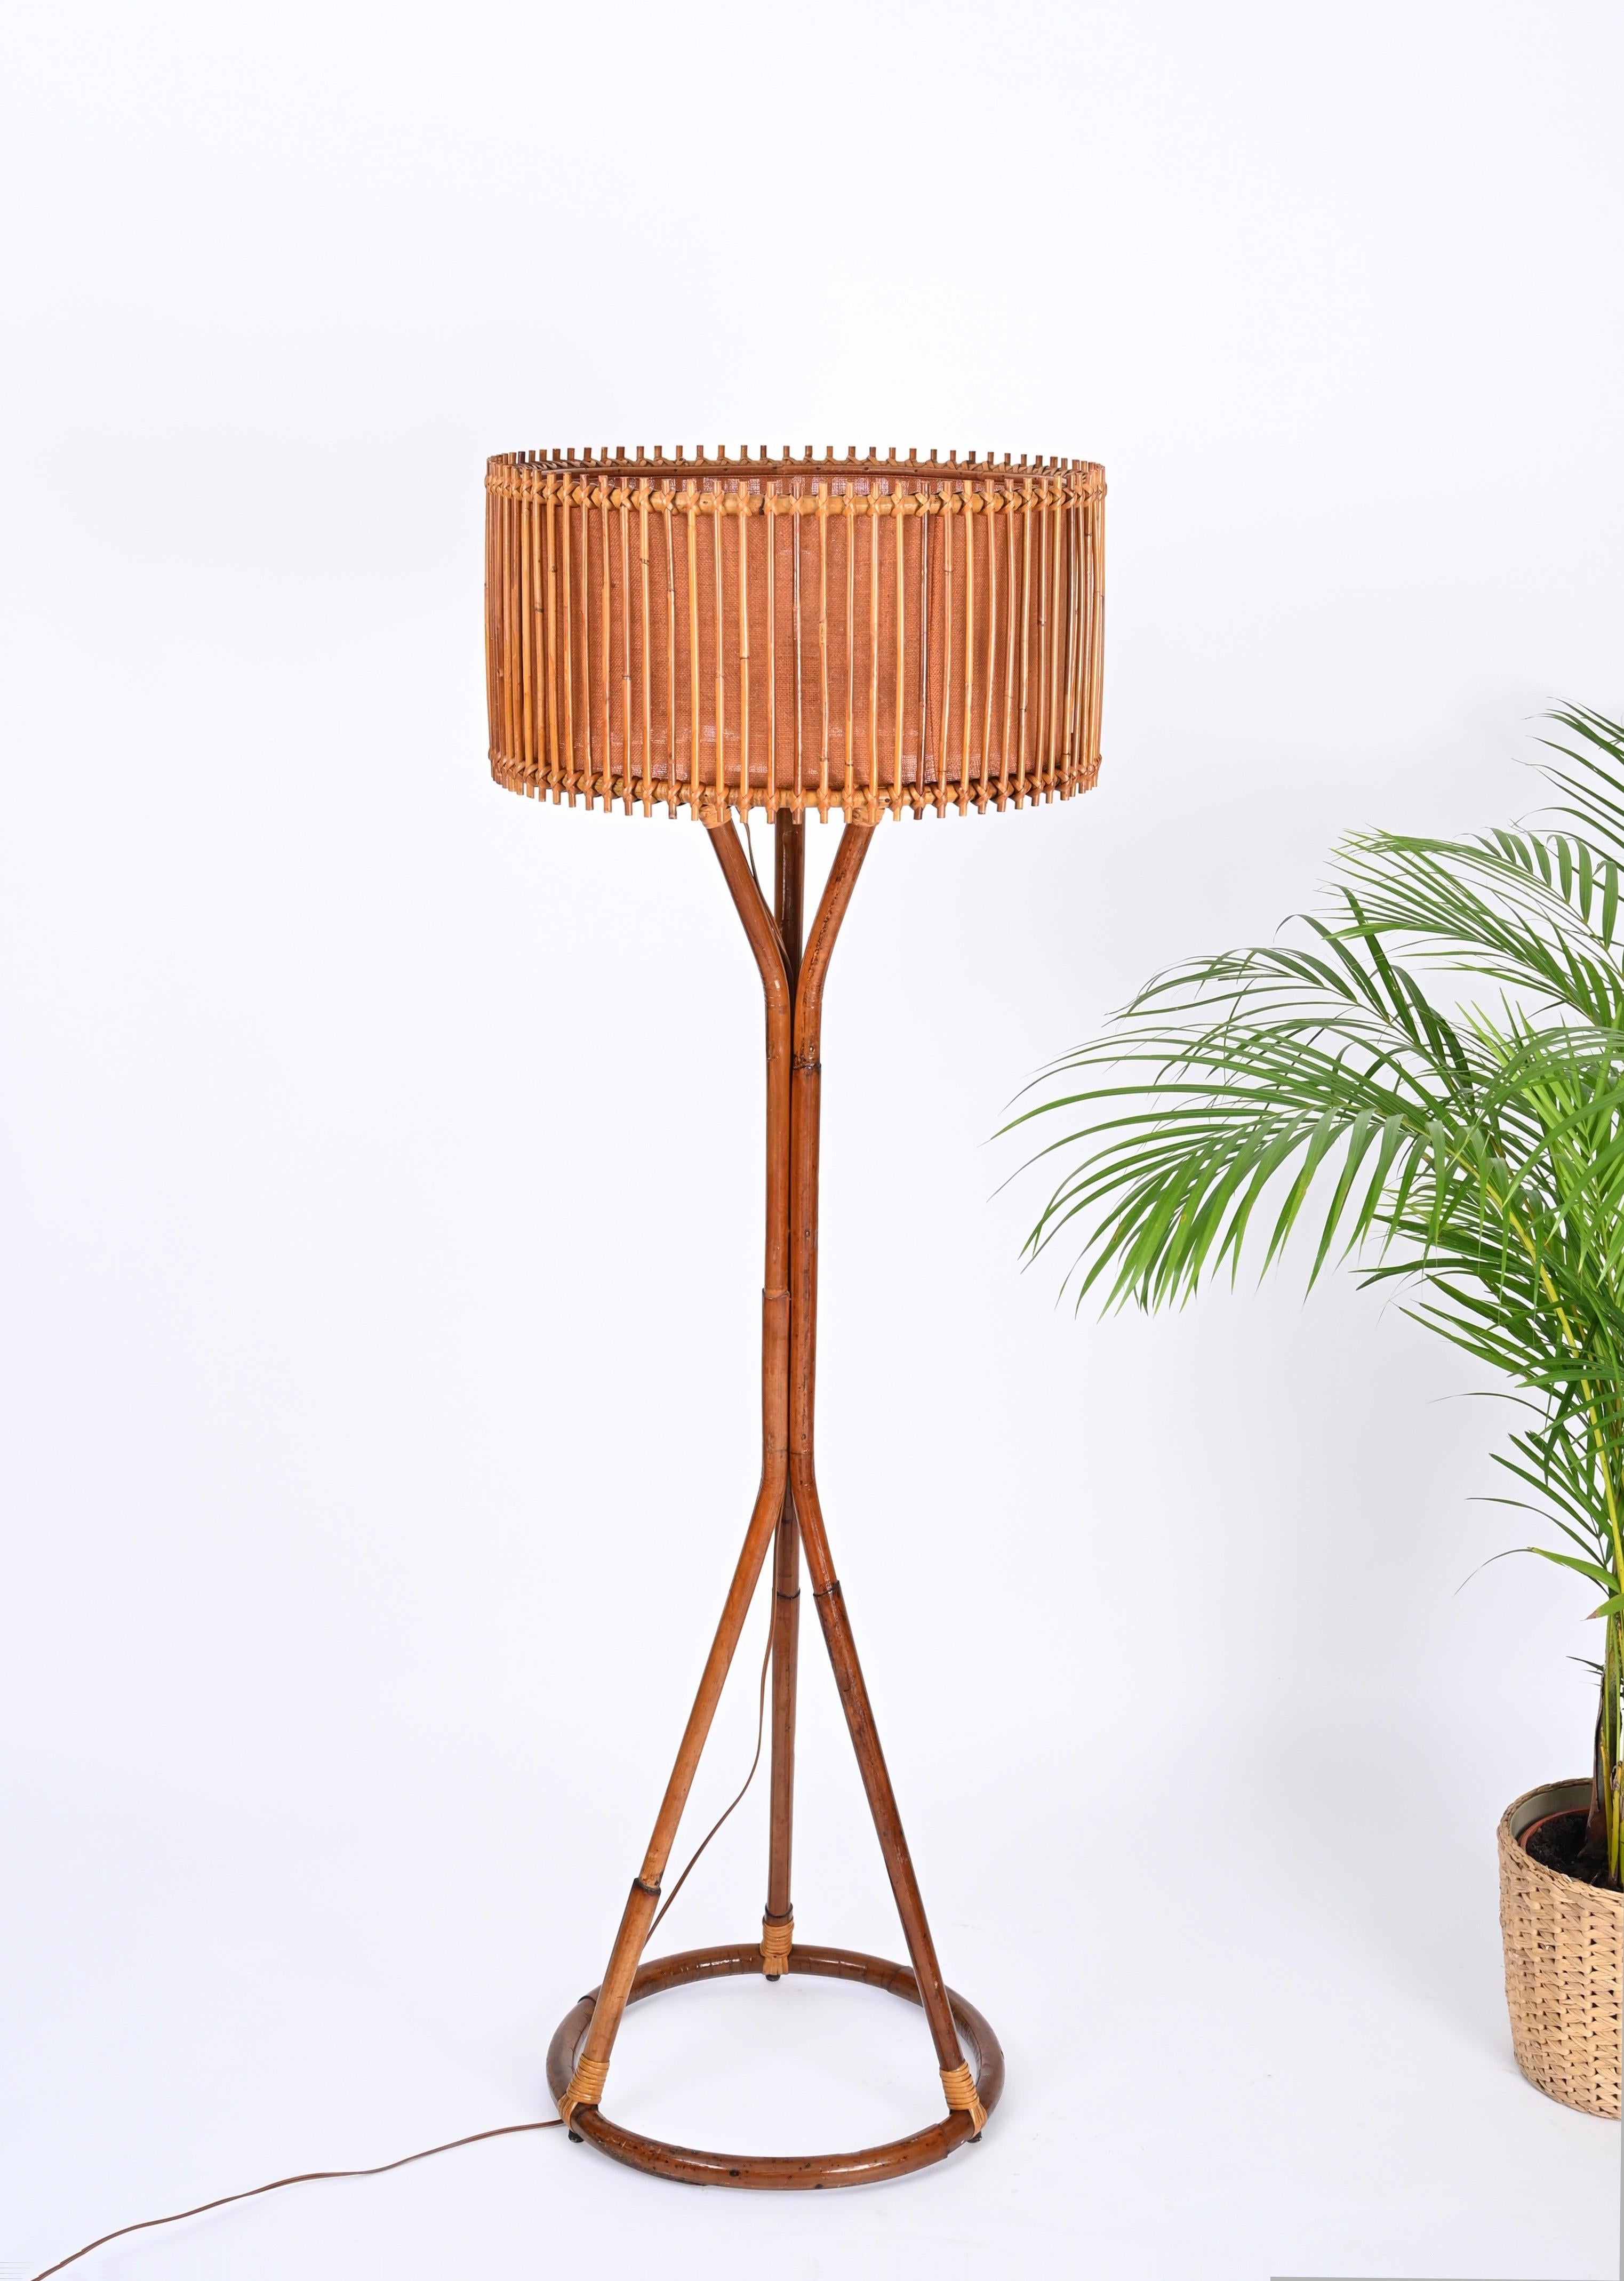 Fantastic Mid-Century floor lamp fully made in curved bamboo and hand-woven rattan wicker. This rare lamp was designed In Italy during the 1960s and is attributed to the mastery of Franco Albini. 

This stylish floor lamp features a round base that